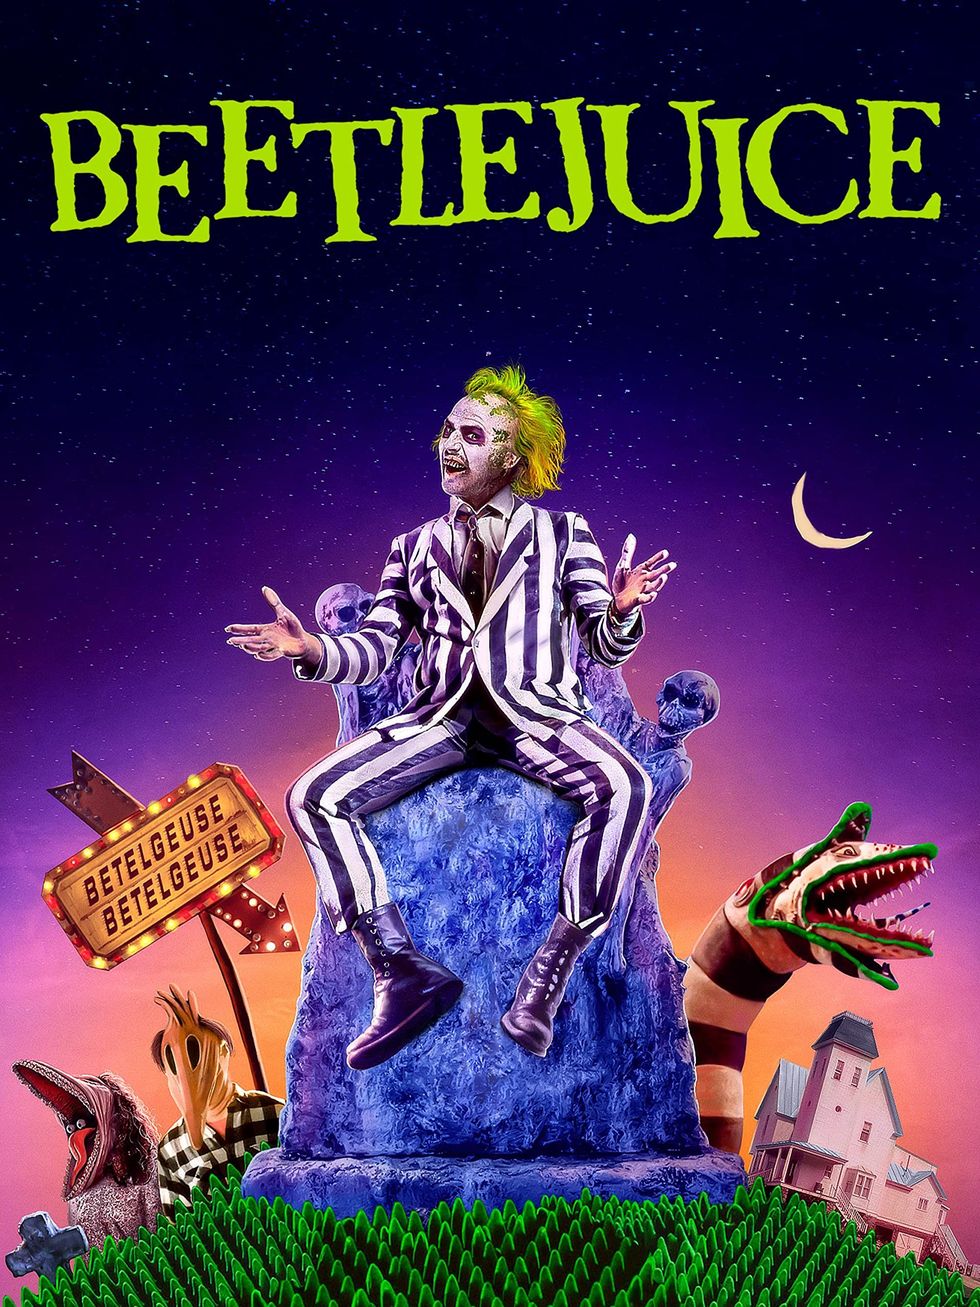 Beetlejuice 2: Cast, Premiere, News, and More